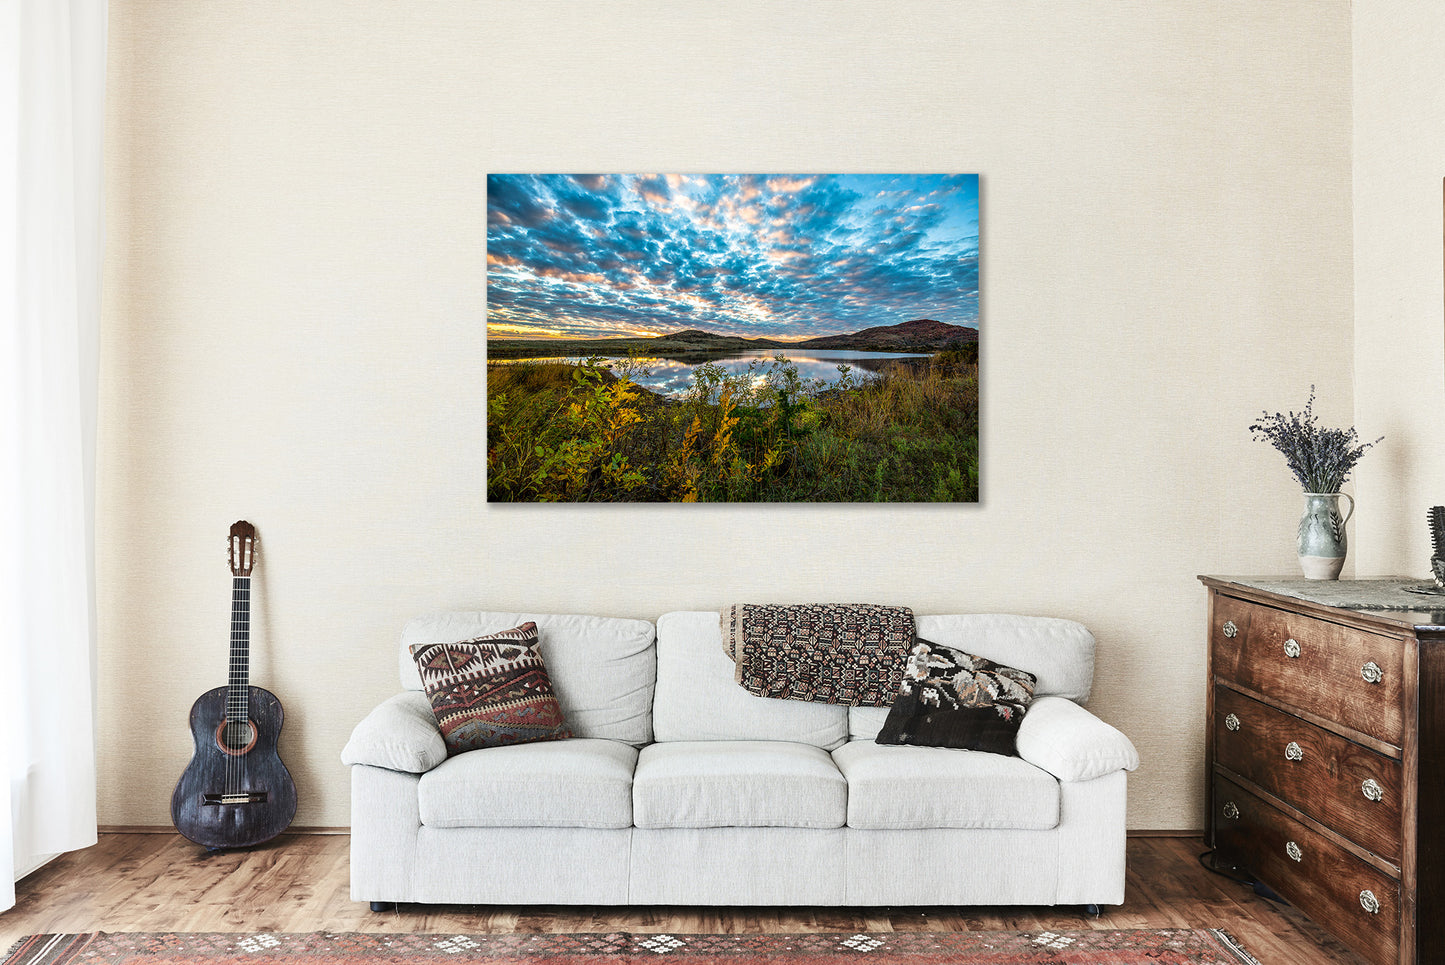 Wichita Mountains Metal Print (Ready to Hang) Photo on Aluminum of Scenic Sky Over Lake at Sunset on Autumn Evening in Oklahoma Great Plains Wall Art Nature Decor